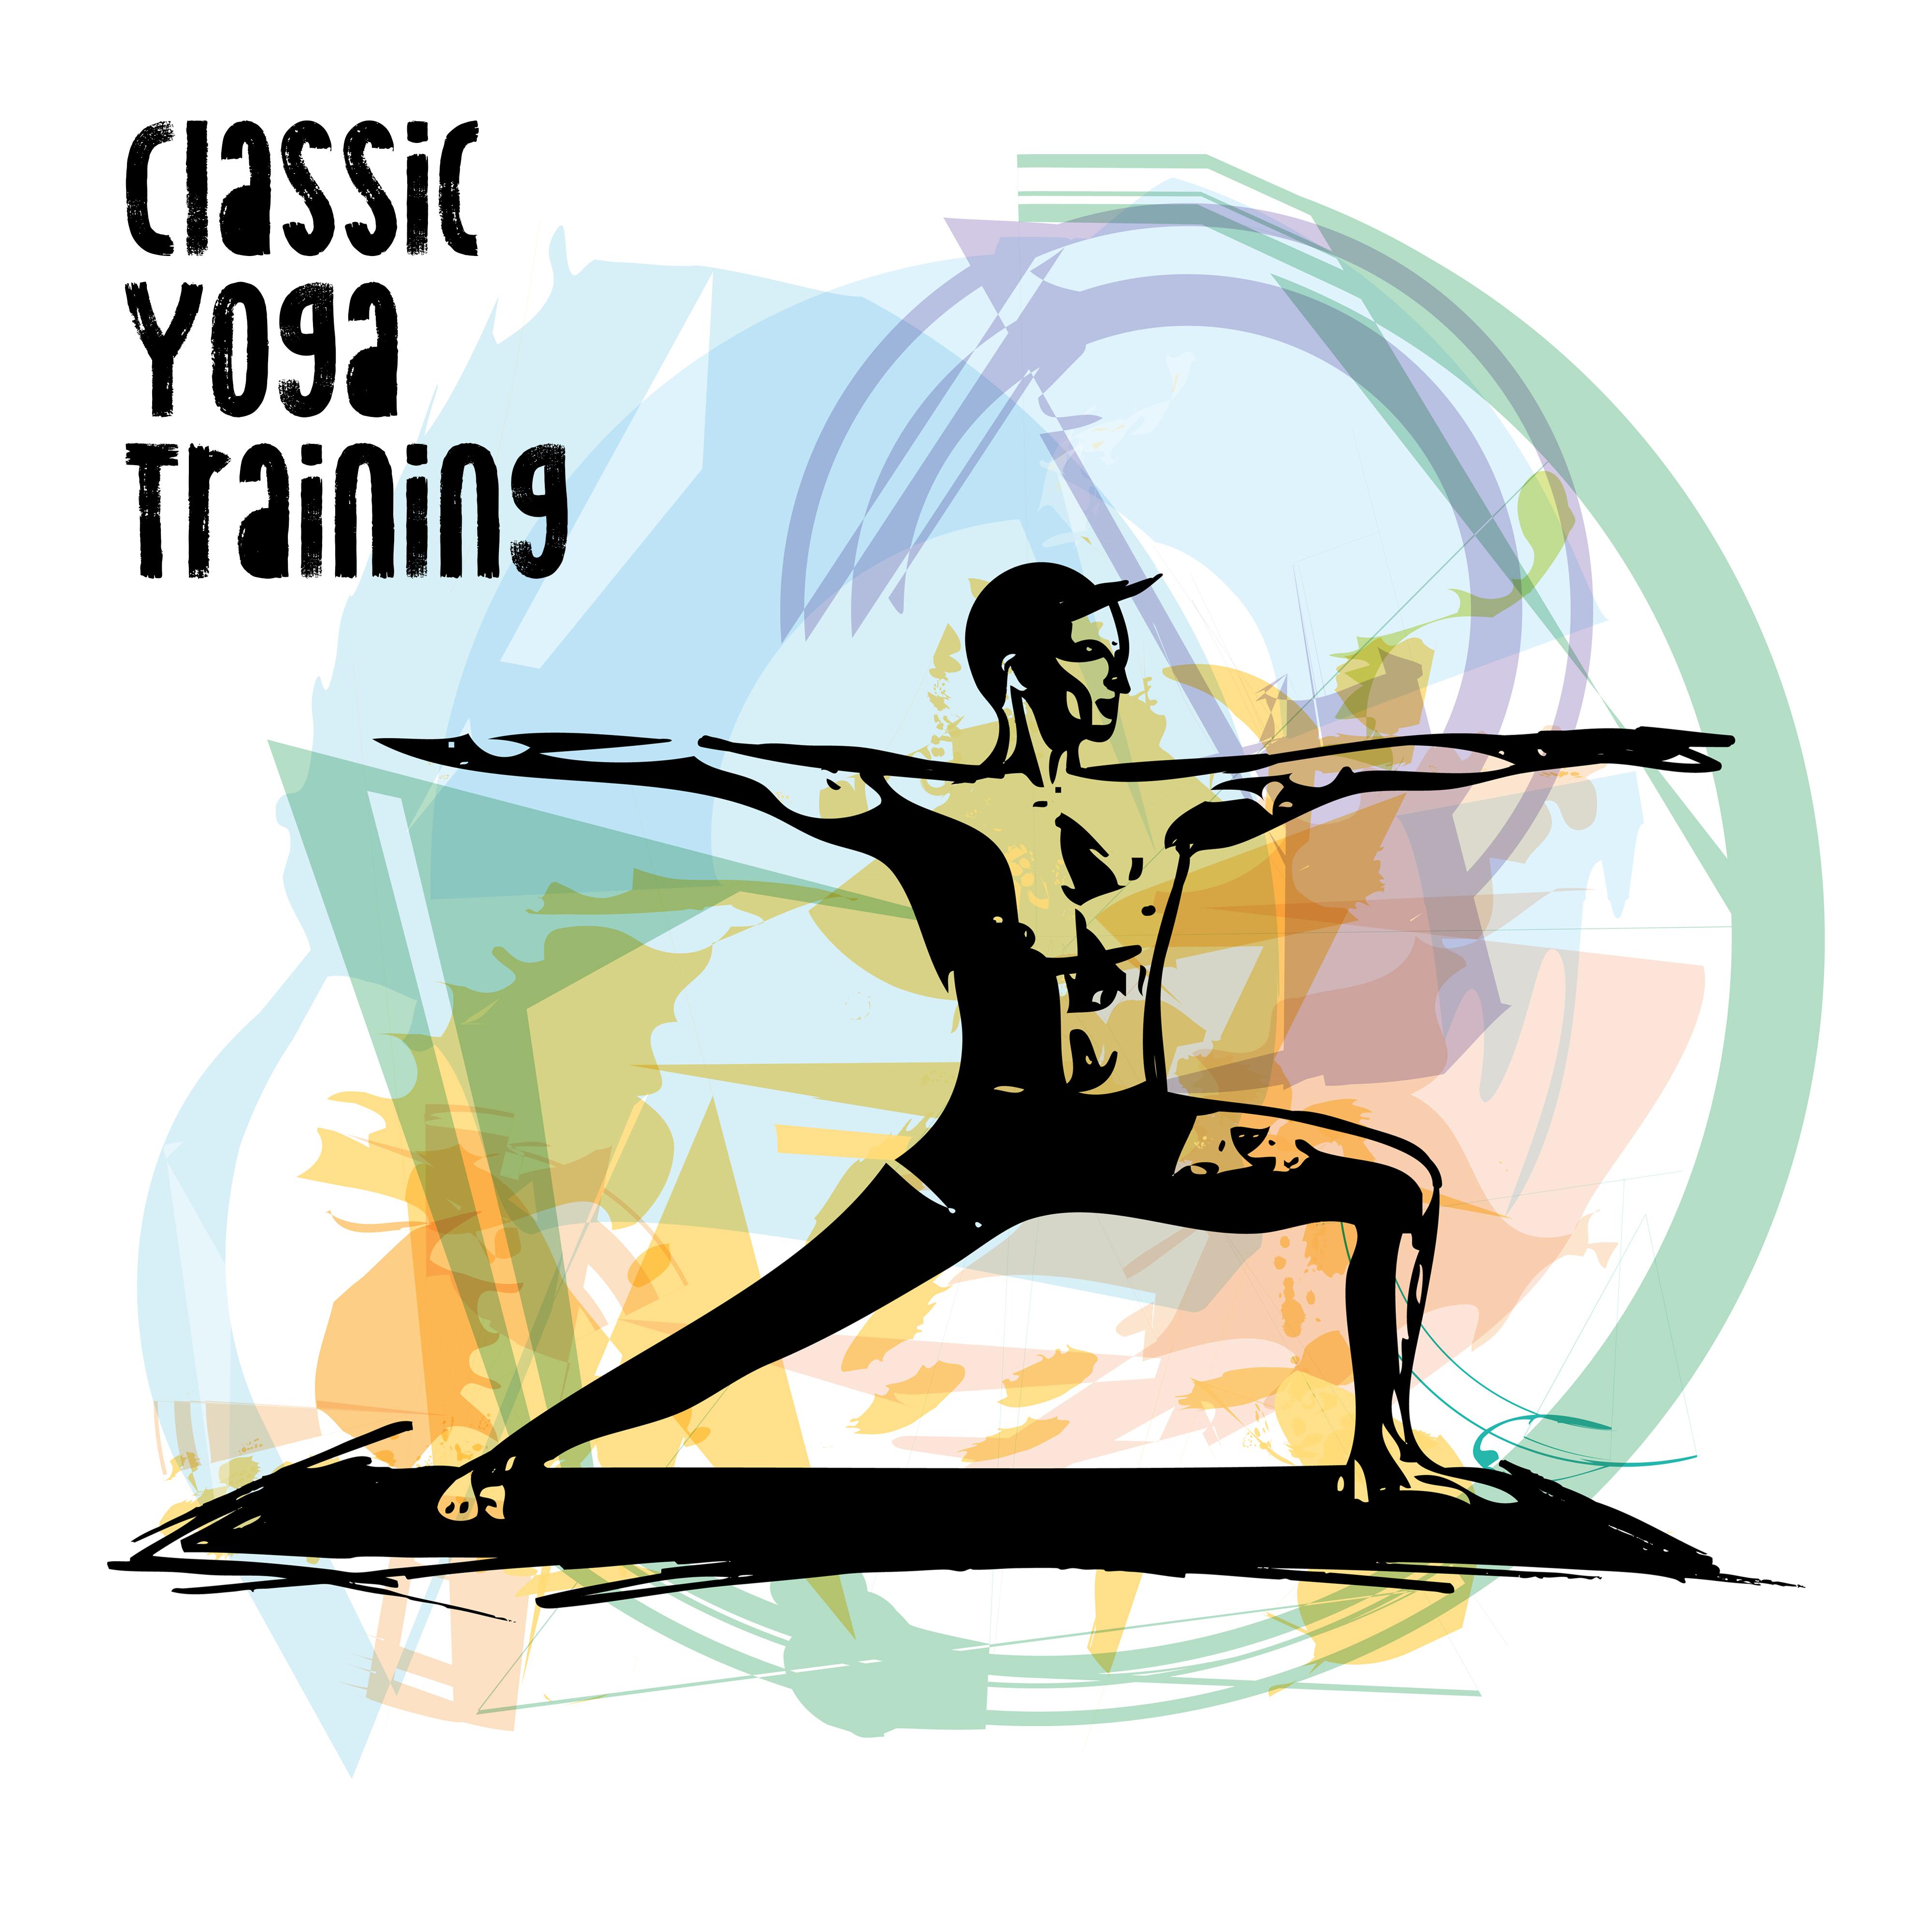 Classic Yoga Training: New Age 2019 Music Compilation for Deep Meditation & Relaxation, Full Concentration on Yoga Poses, Balancing Chakra